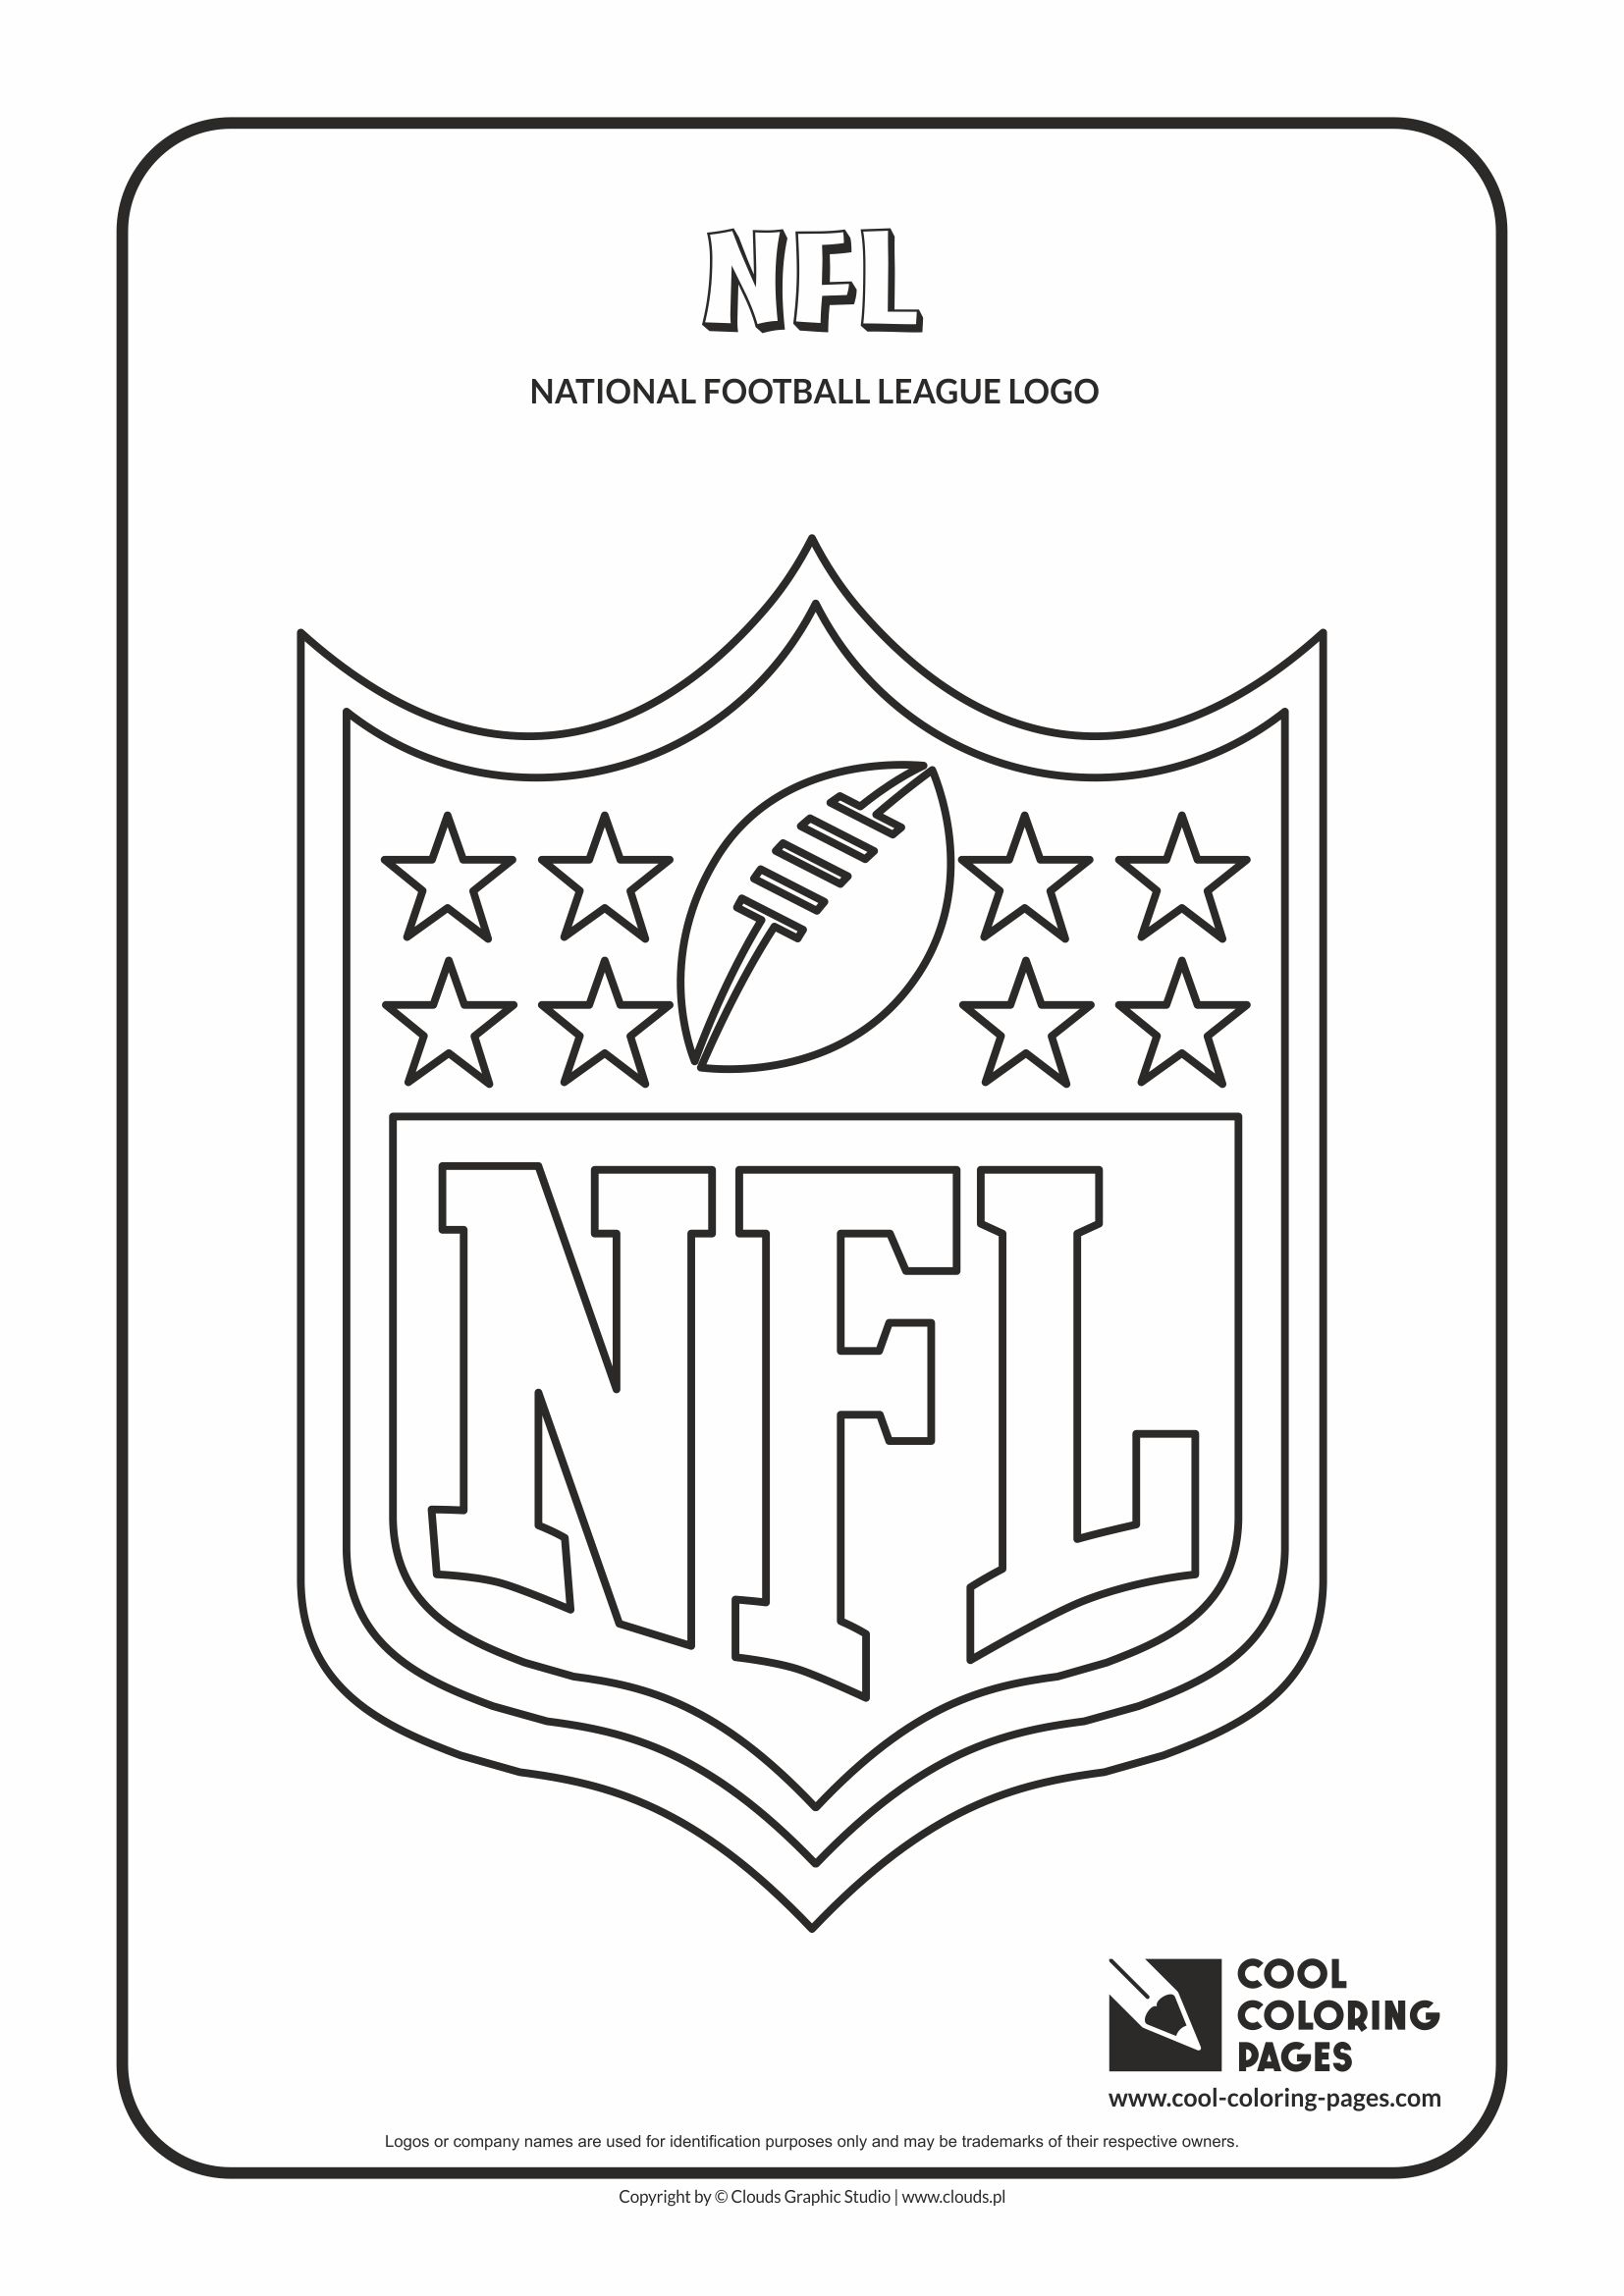 Cool Coloring Pages - NFL logo coloring page